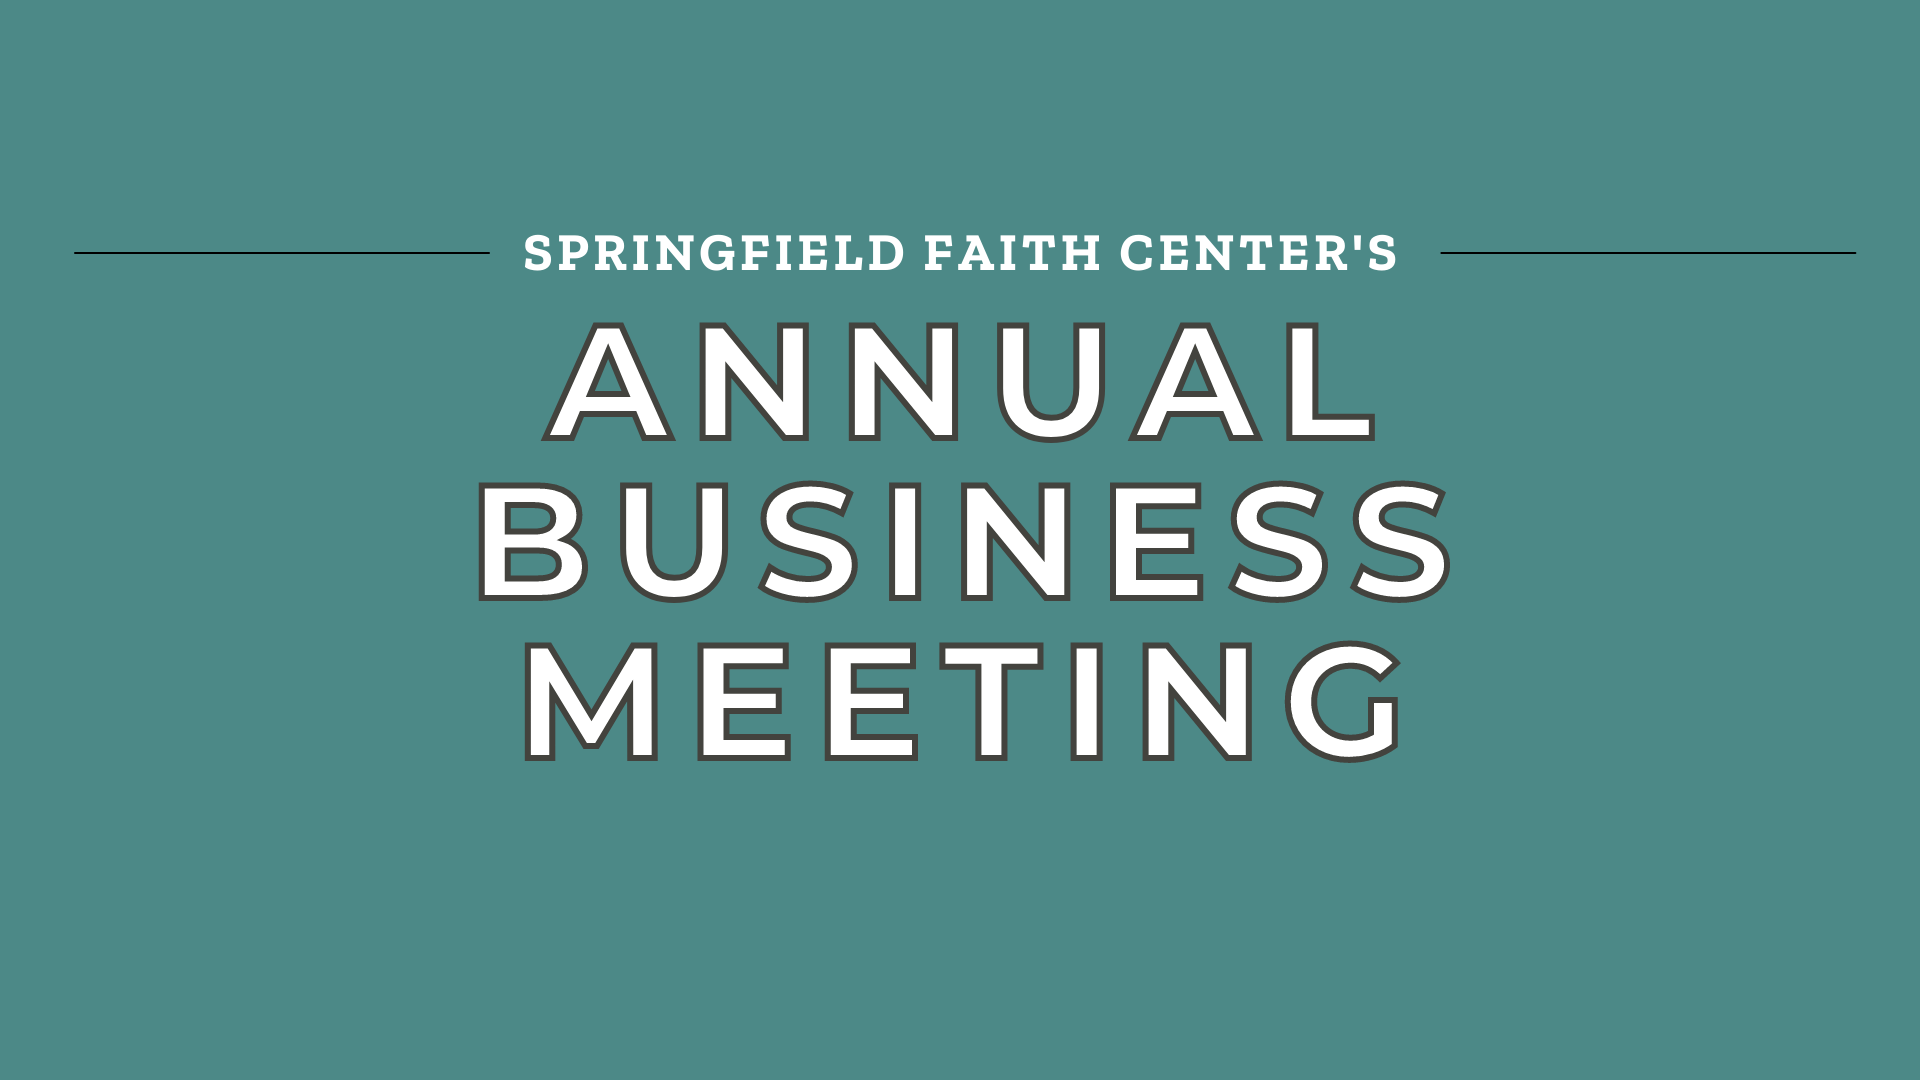 annual business meeting event image image